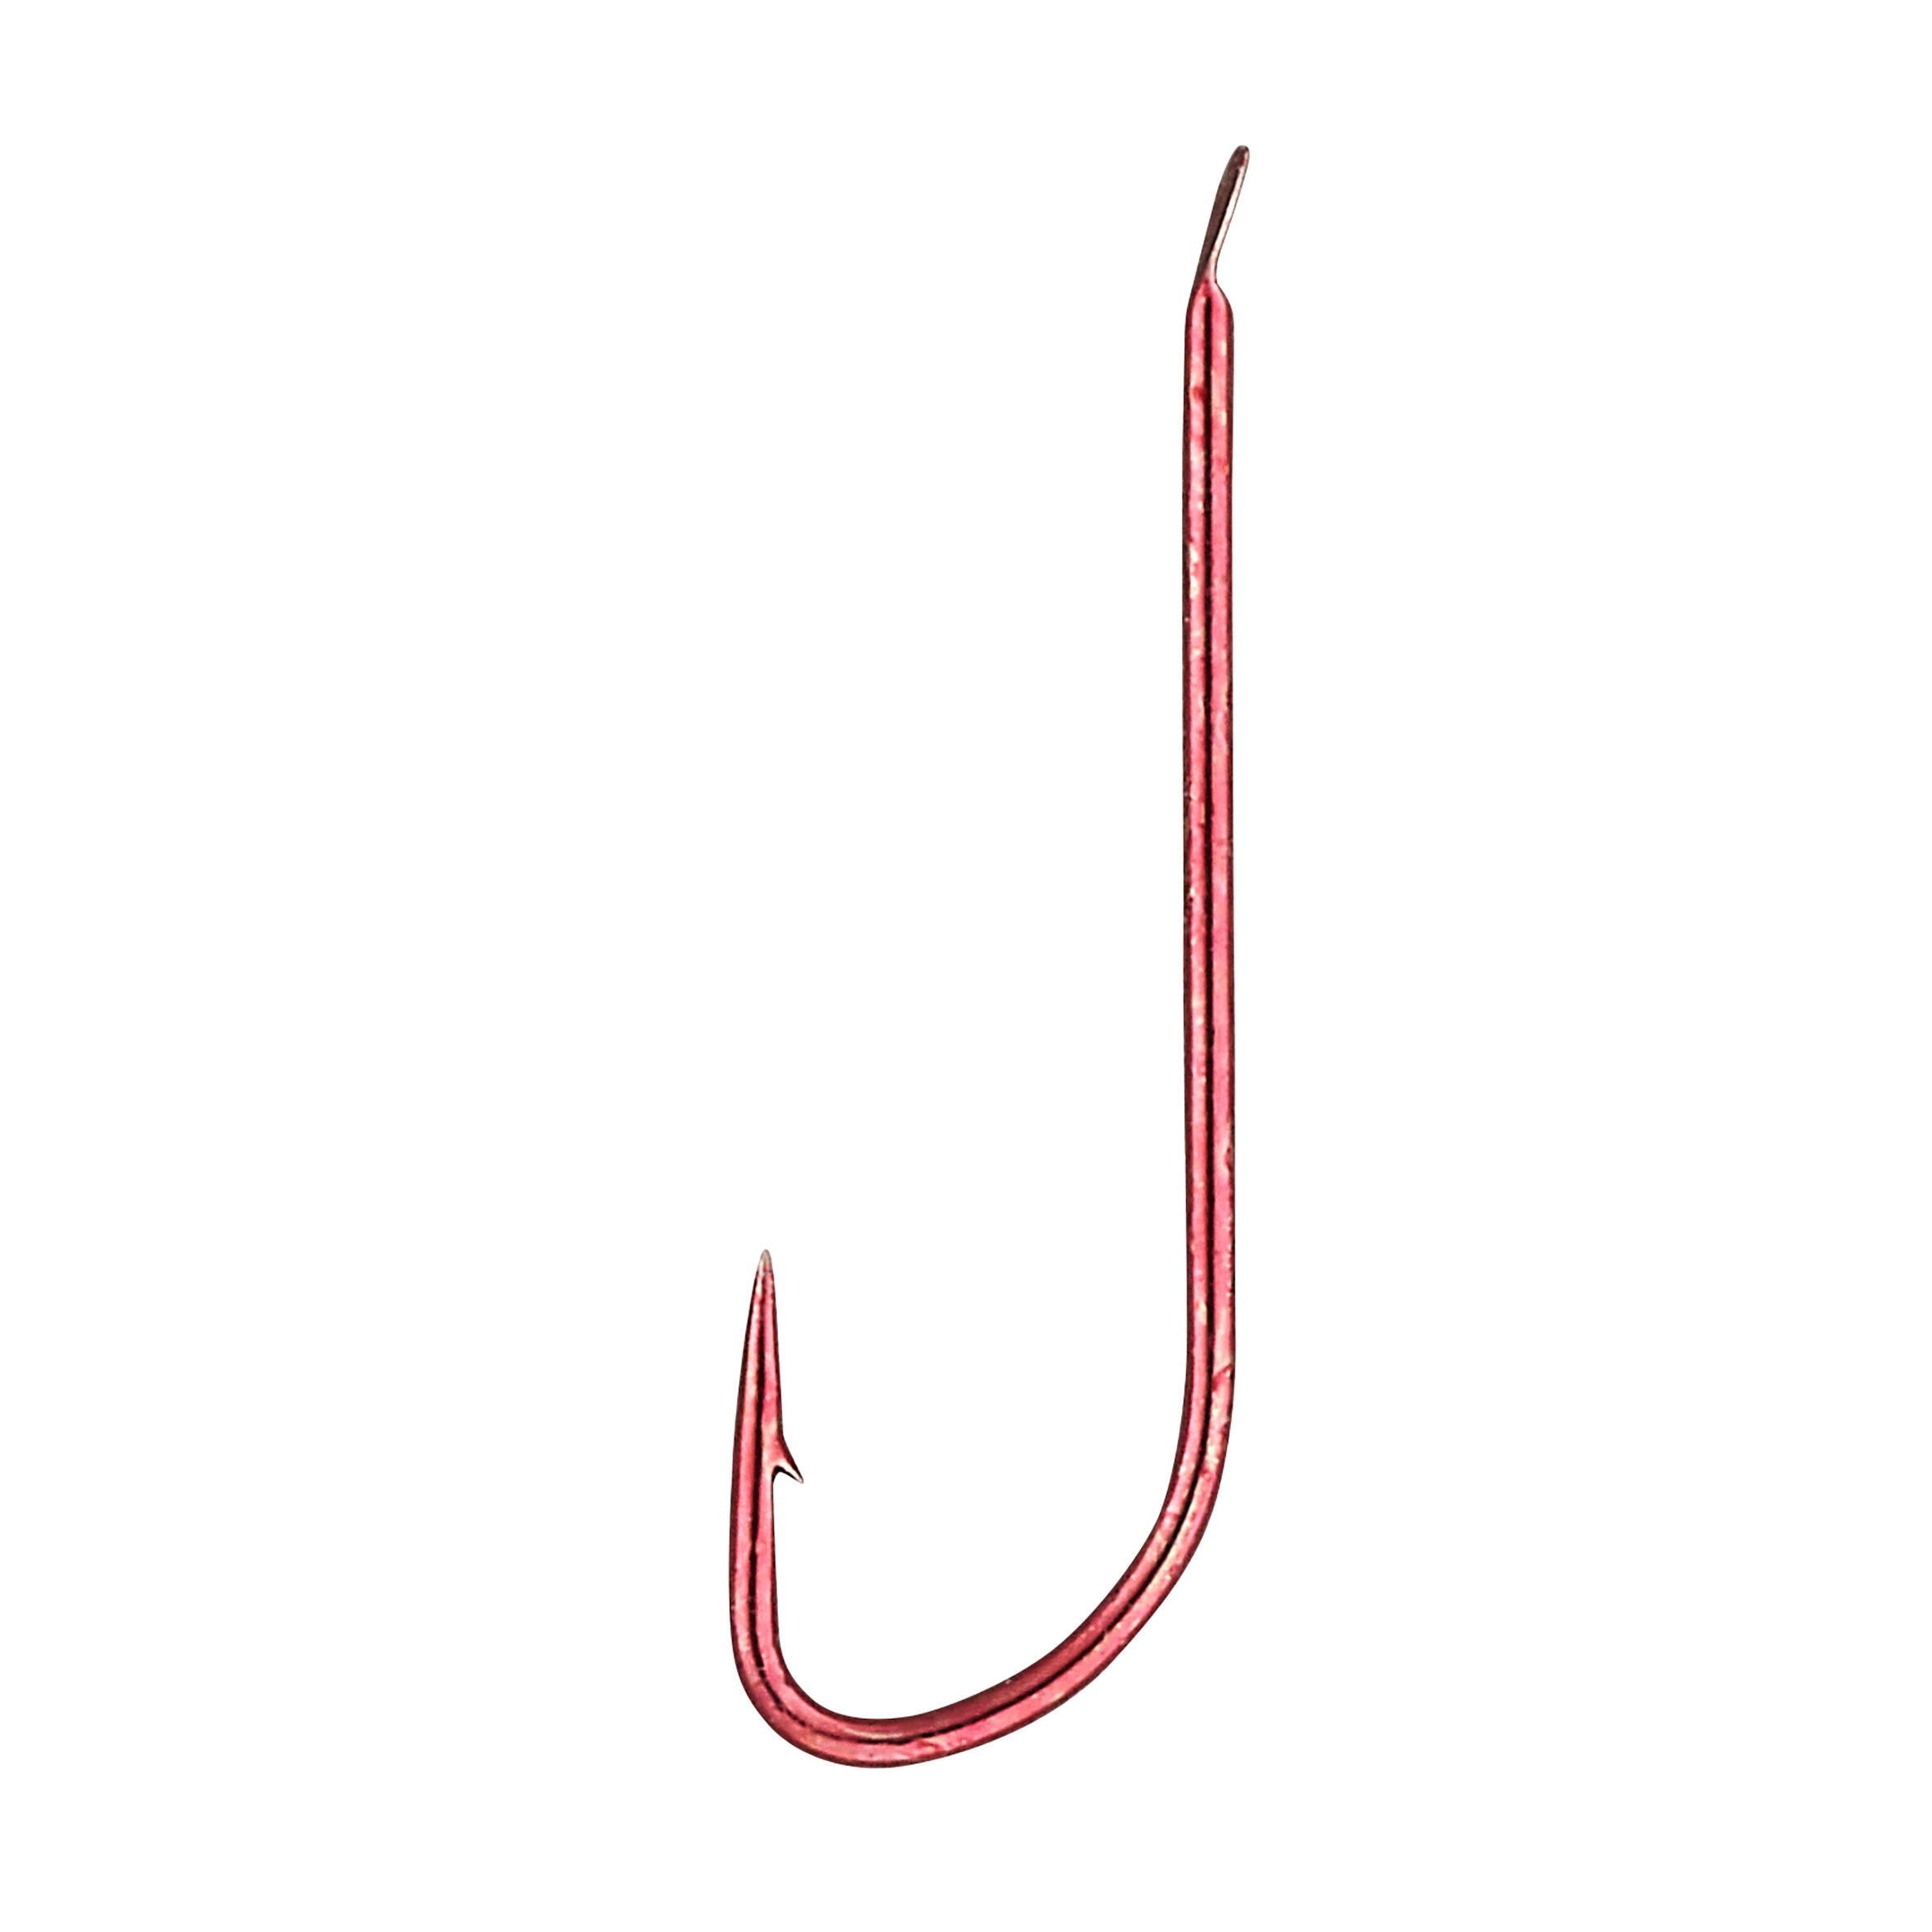 SINGLE RED UNMOUNTED HOOK PA HK 2 X10  FOR STILL FISHING 9/16